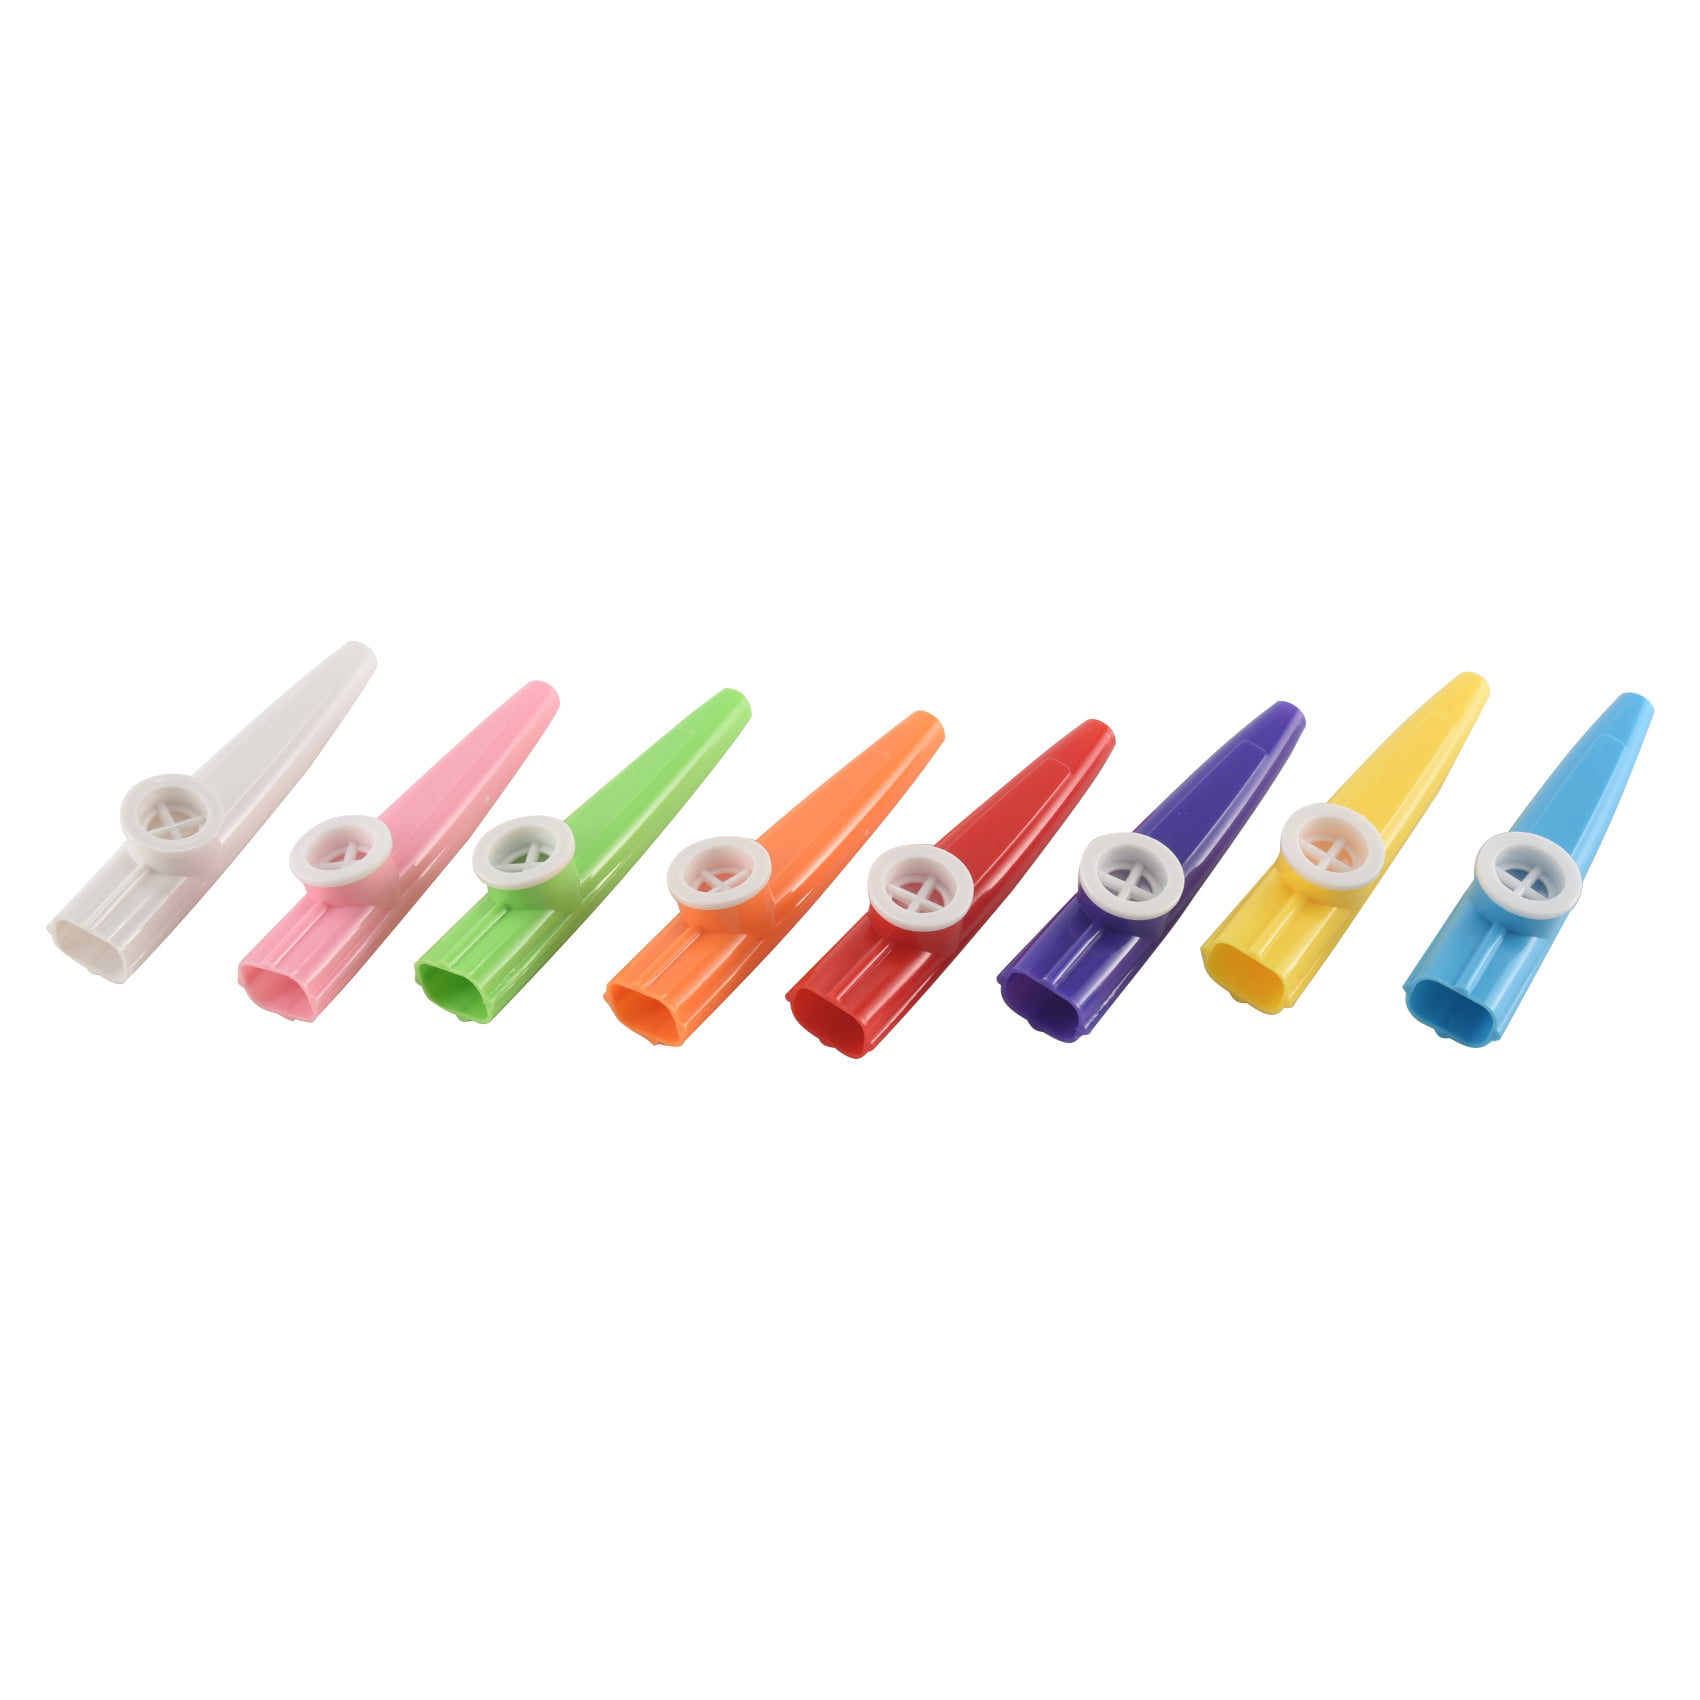 24 Pieces Plastic Kazoos 8 Colorful Musical Instrument, Good For